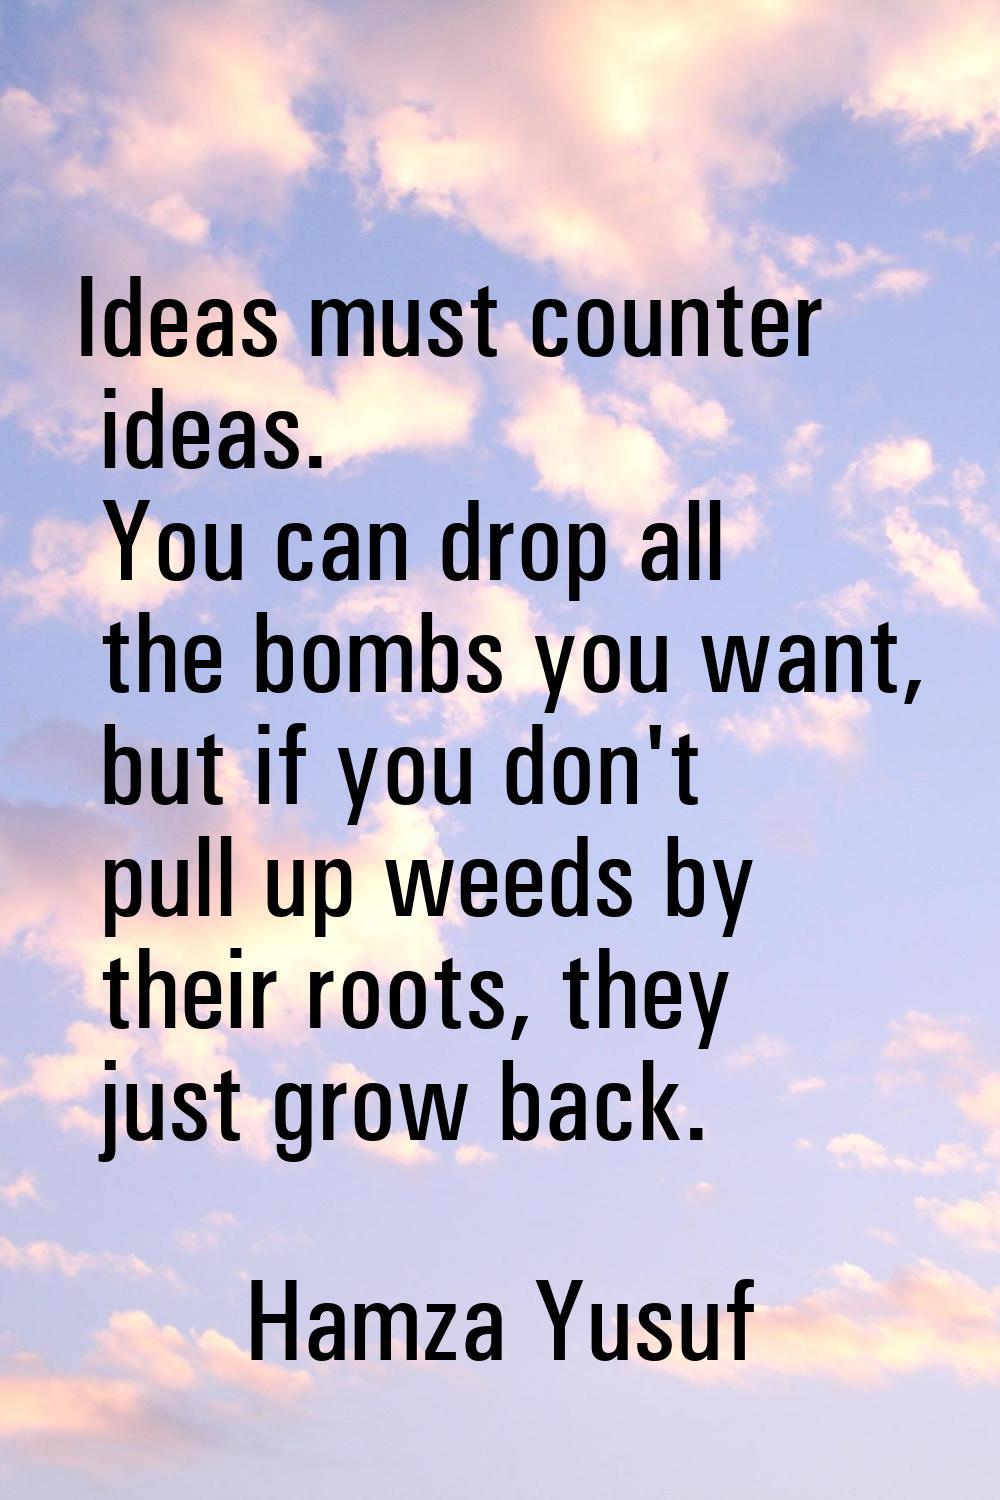 Ideas must counter ideas. You can drop all the bombs you want, but if you don't pull up weeds by th